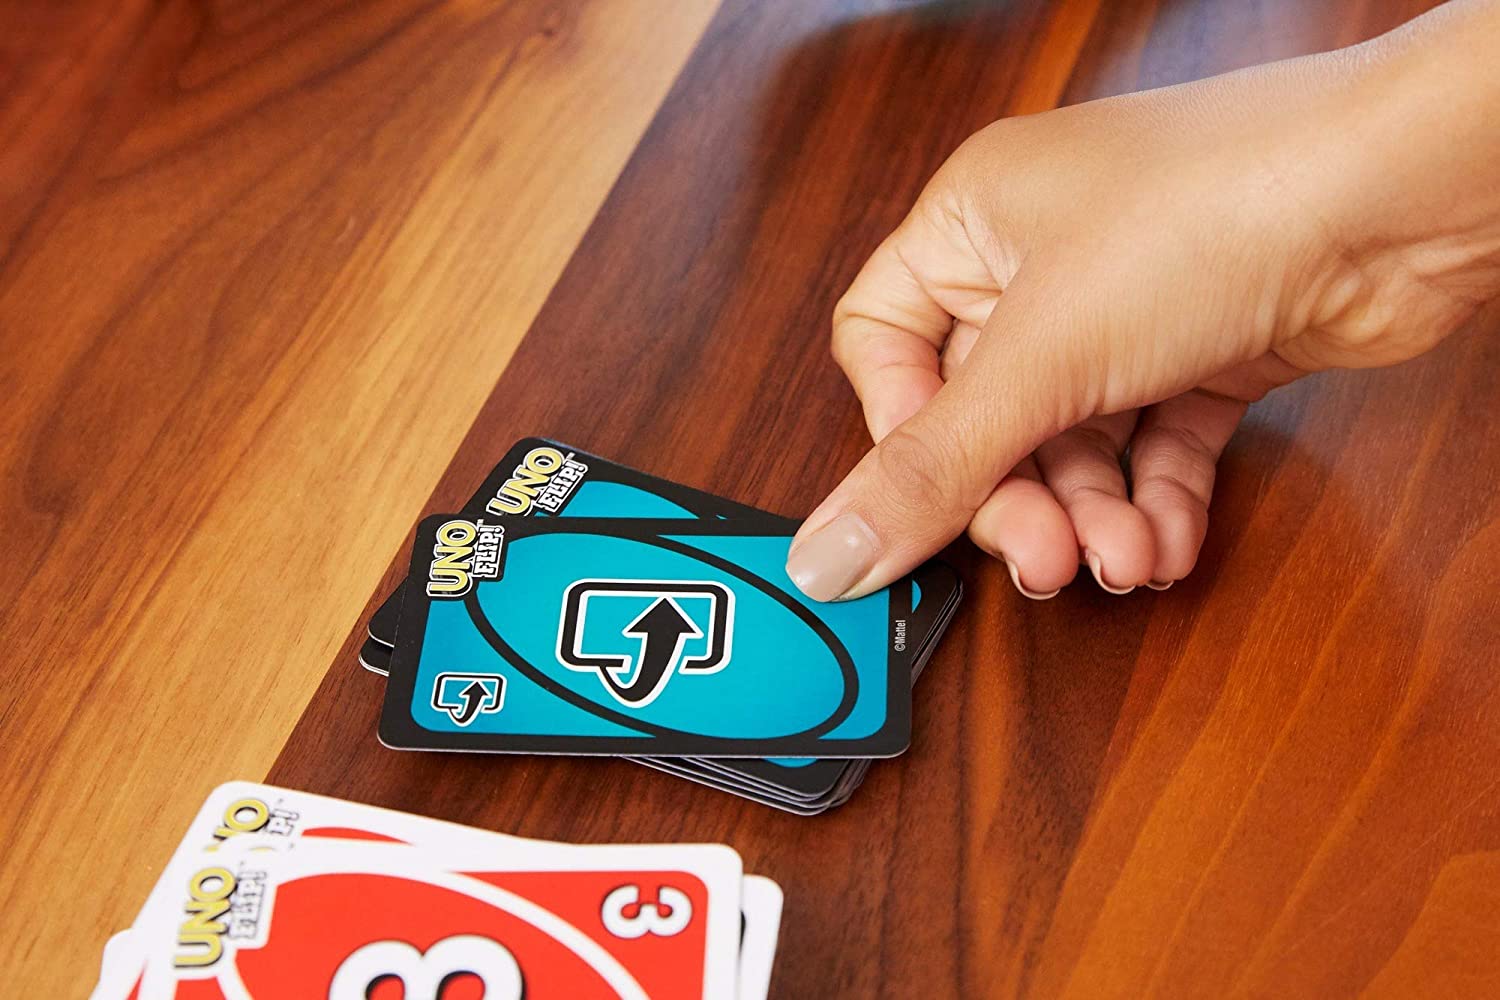 UNO Flip! Splash Card Game for Kids, Adults & Family Night with  Water-Resistant Double-Sided Cards